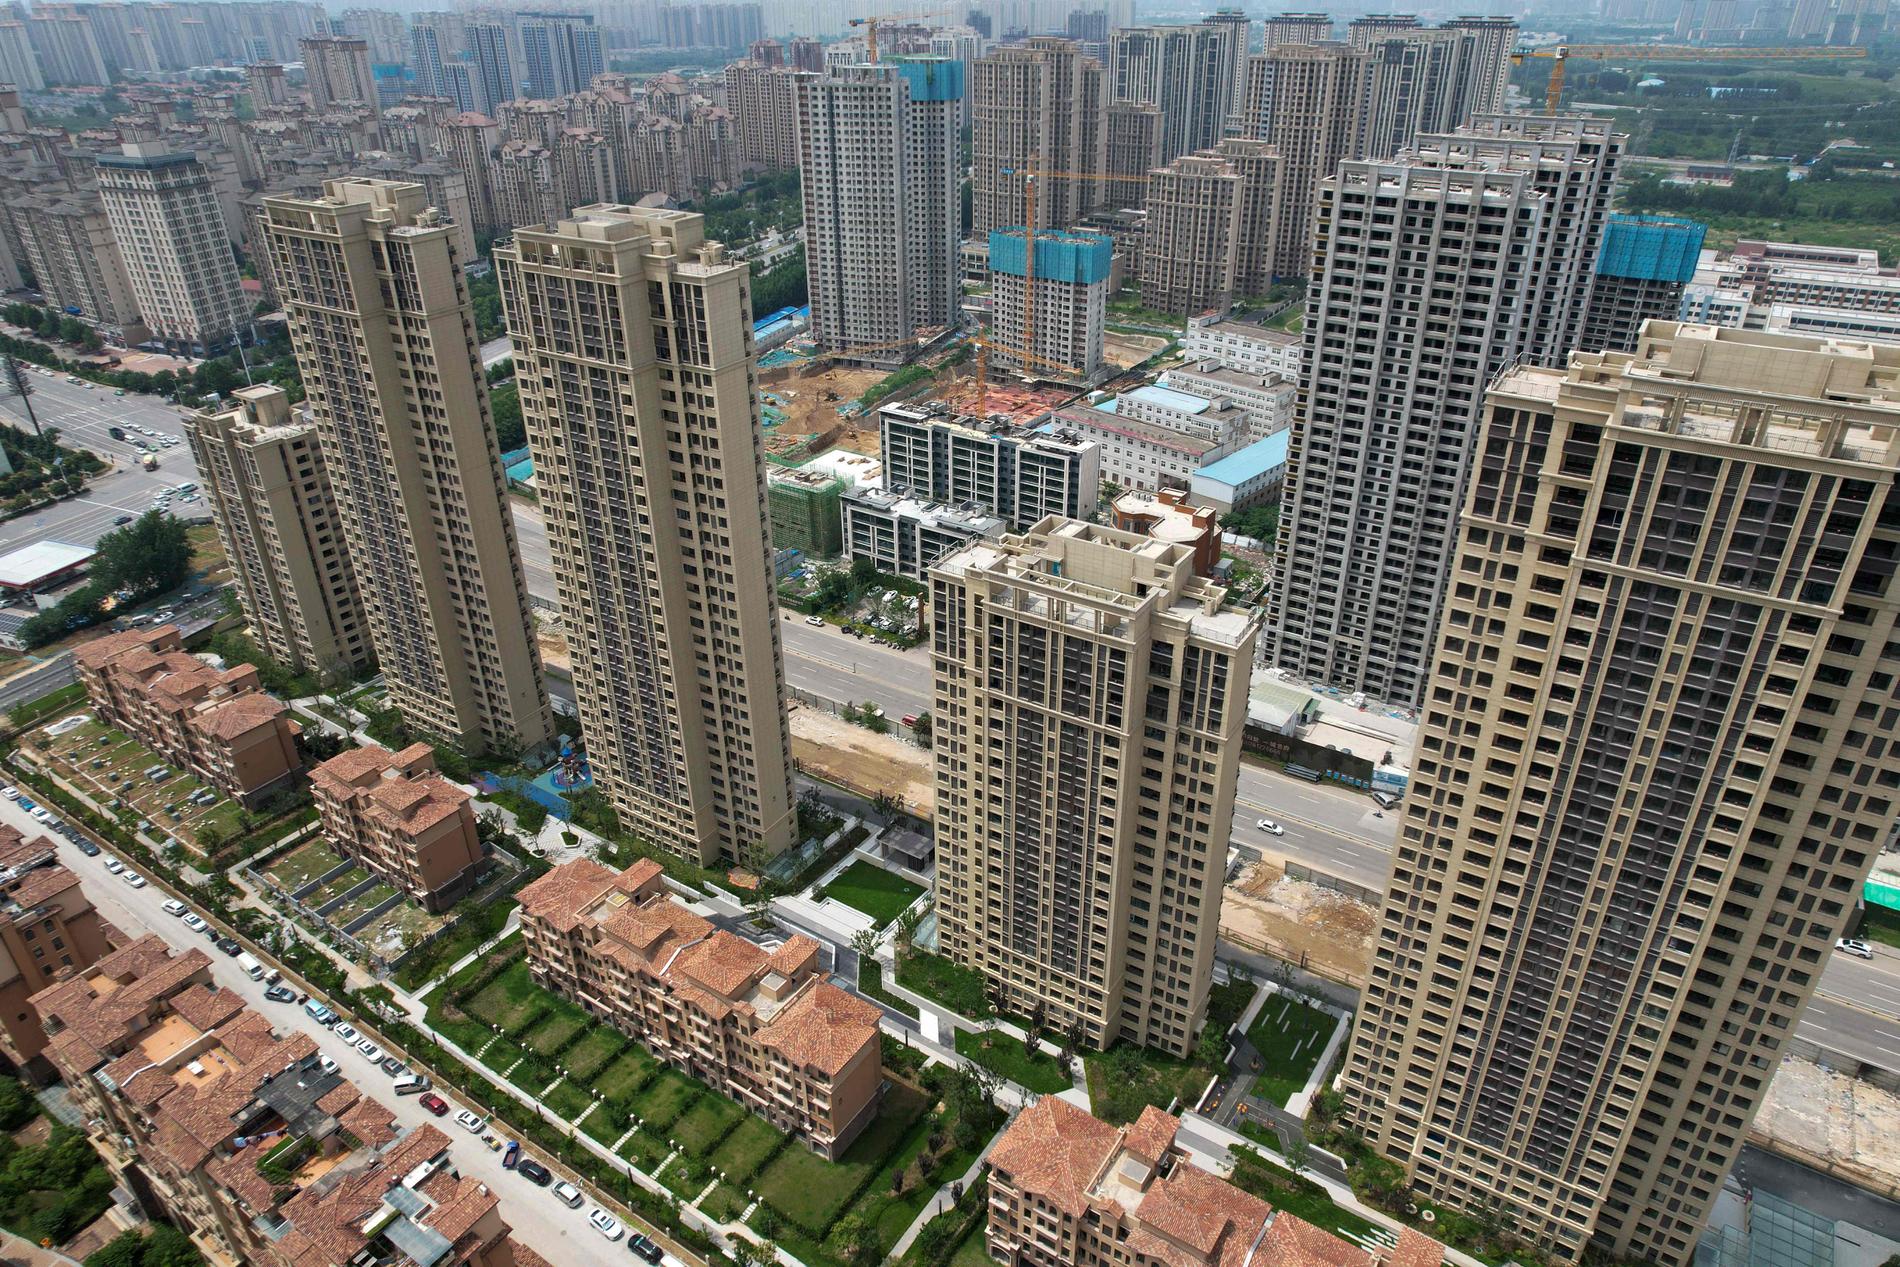 China’s Real Estate Sector Experience Upward Trend on Hong Kong Stock Exchange following Government Measures